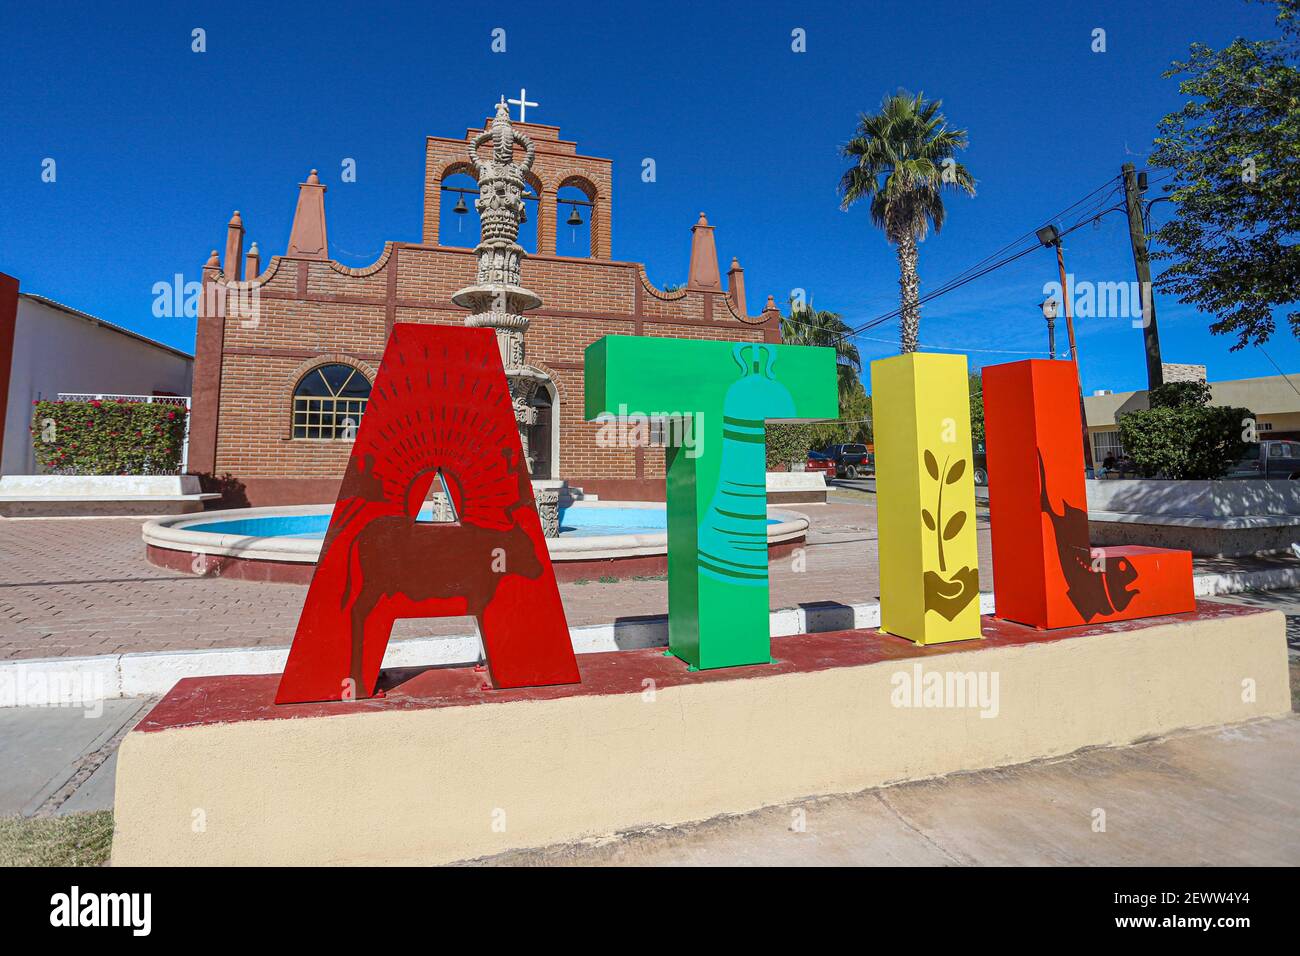 Monumental colored letters and Temple of San Francisco de Asís in Atil, Sonora Mexico. Atil small town in the northwest of the Mexican state of Sonora. The neighboring municipalities are Tubutama, Trincheras, Oquitoa and Altar. It was founded in 1751 Jesuit missionary Jacobo Sedelmayer. The first inhabitants were the Pima Alto or Nebome Indians. Atil means 'Arrowhead', in the Pima language.  (Photo by Luis Gutierrez / Norte Photo)  Letras monumentales de colores y Templo de San Francisco de Asís en Atil, Sonora Mexico. Átil pequeño pueblo en el noroeste del estado mexicano de Sonora.  Los muni Stock Photo